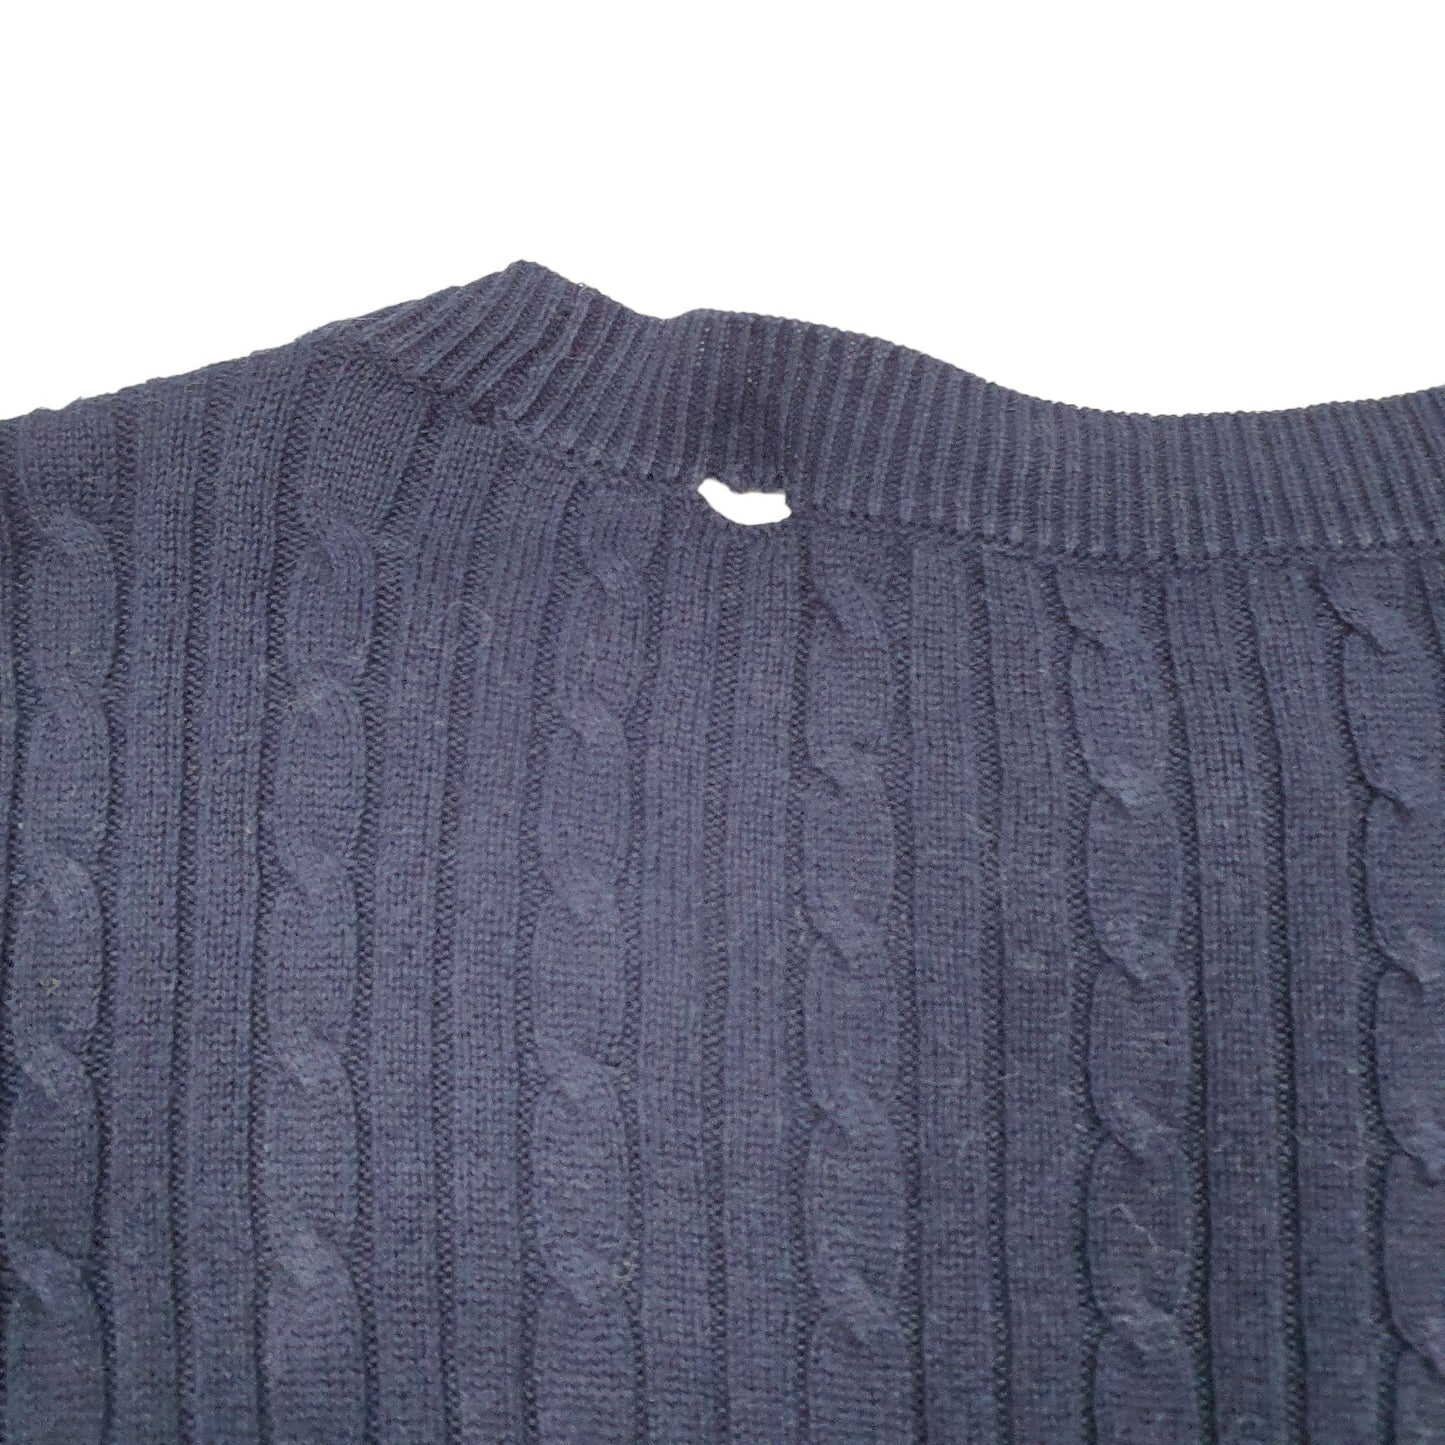 Womens Navy Chaps Knit Cable Cardigan V Neck Jumper